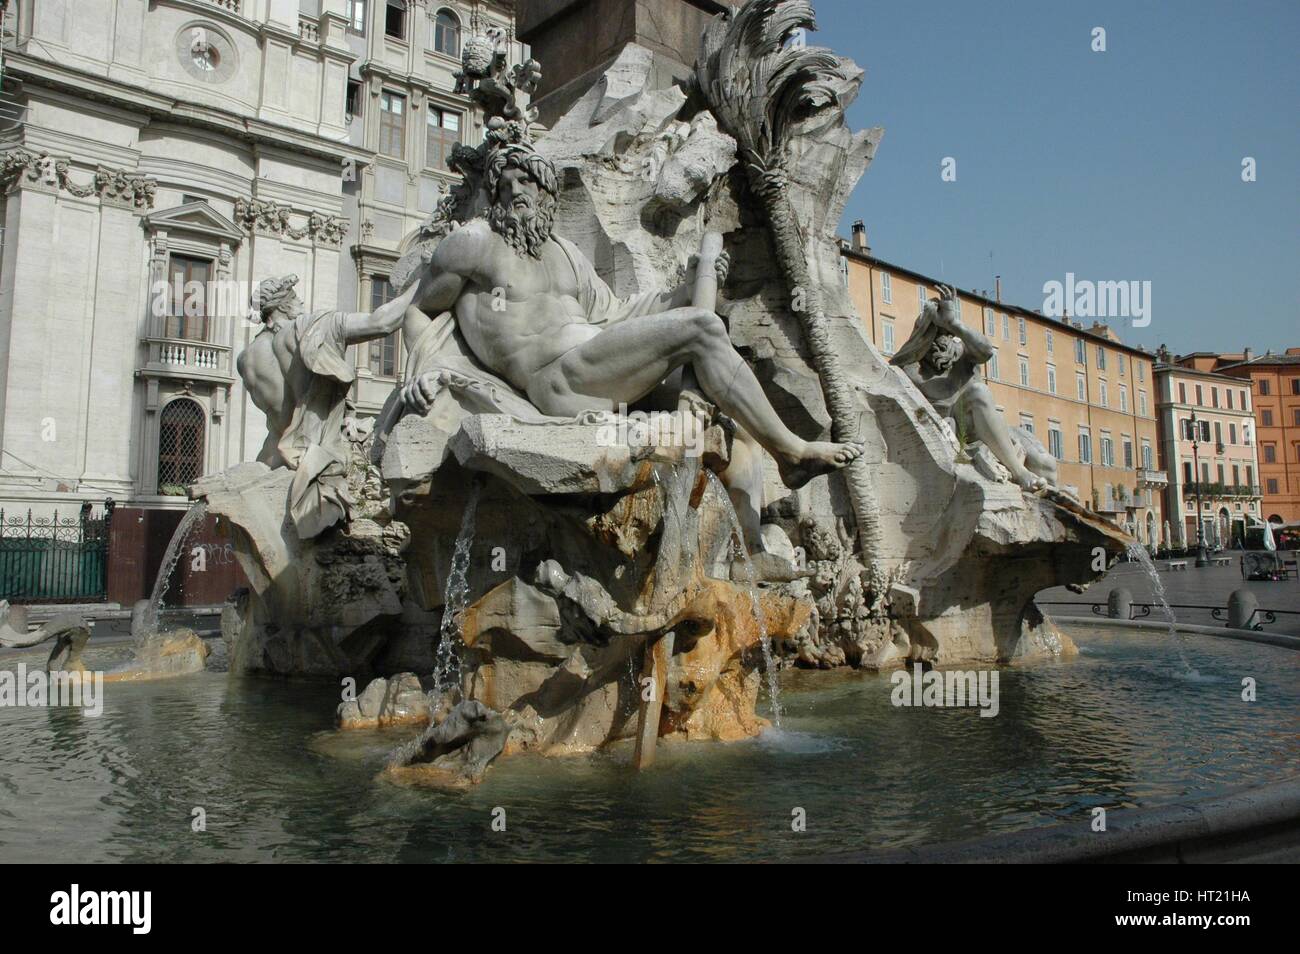 The Fountain of the Four Rivers ( Fontana dei Quattro Fiumi ) in Piazza Navona. Designed by Gian Lor Artist: Werner Forman. Stock Photo